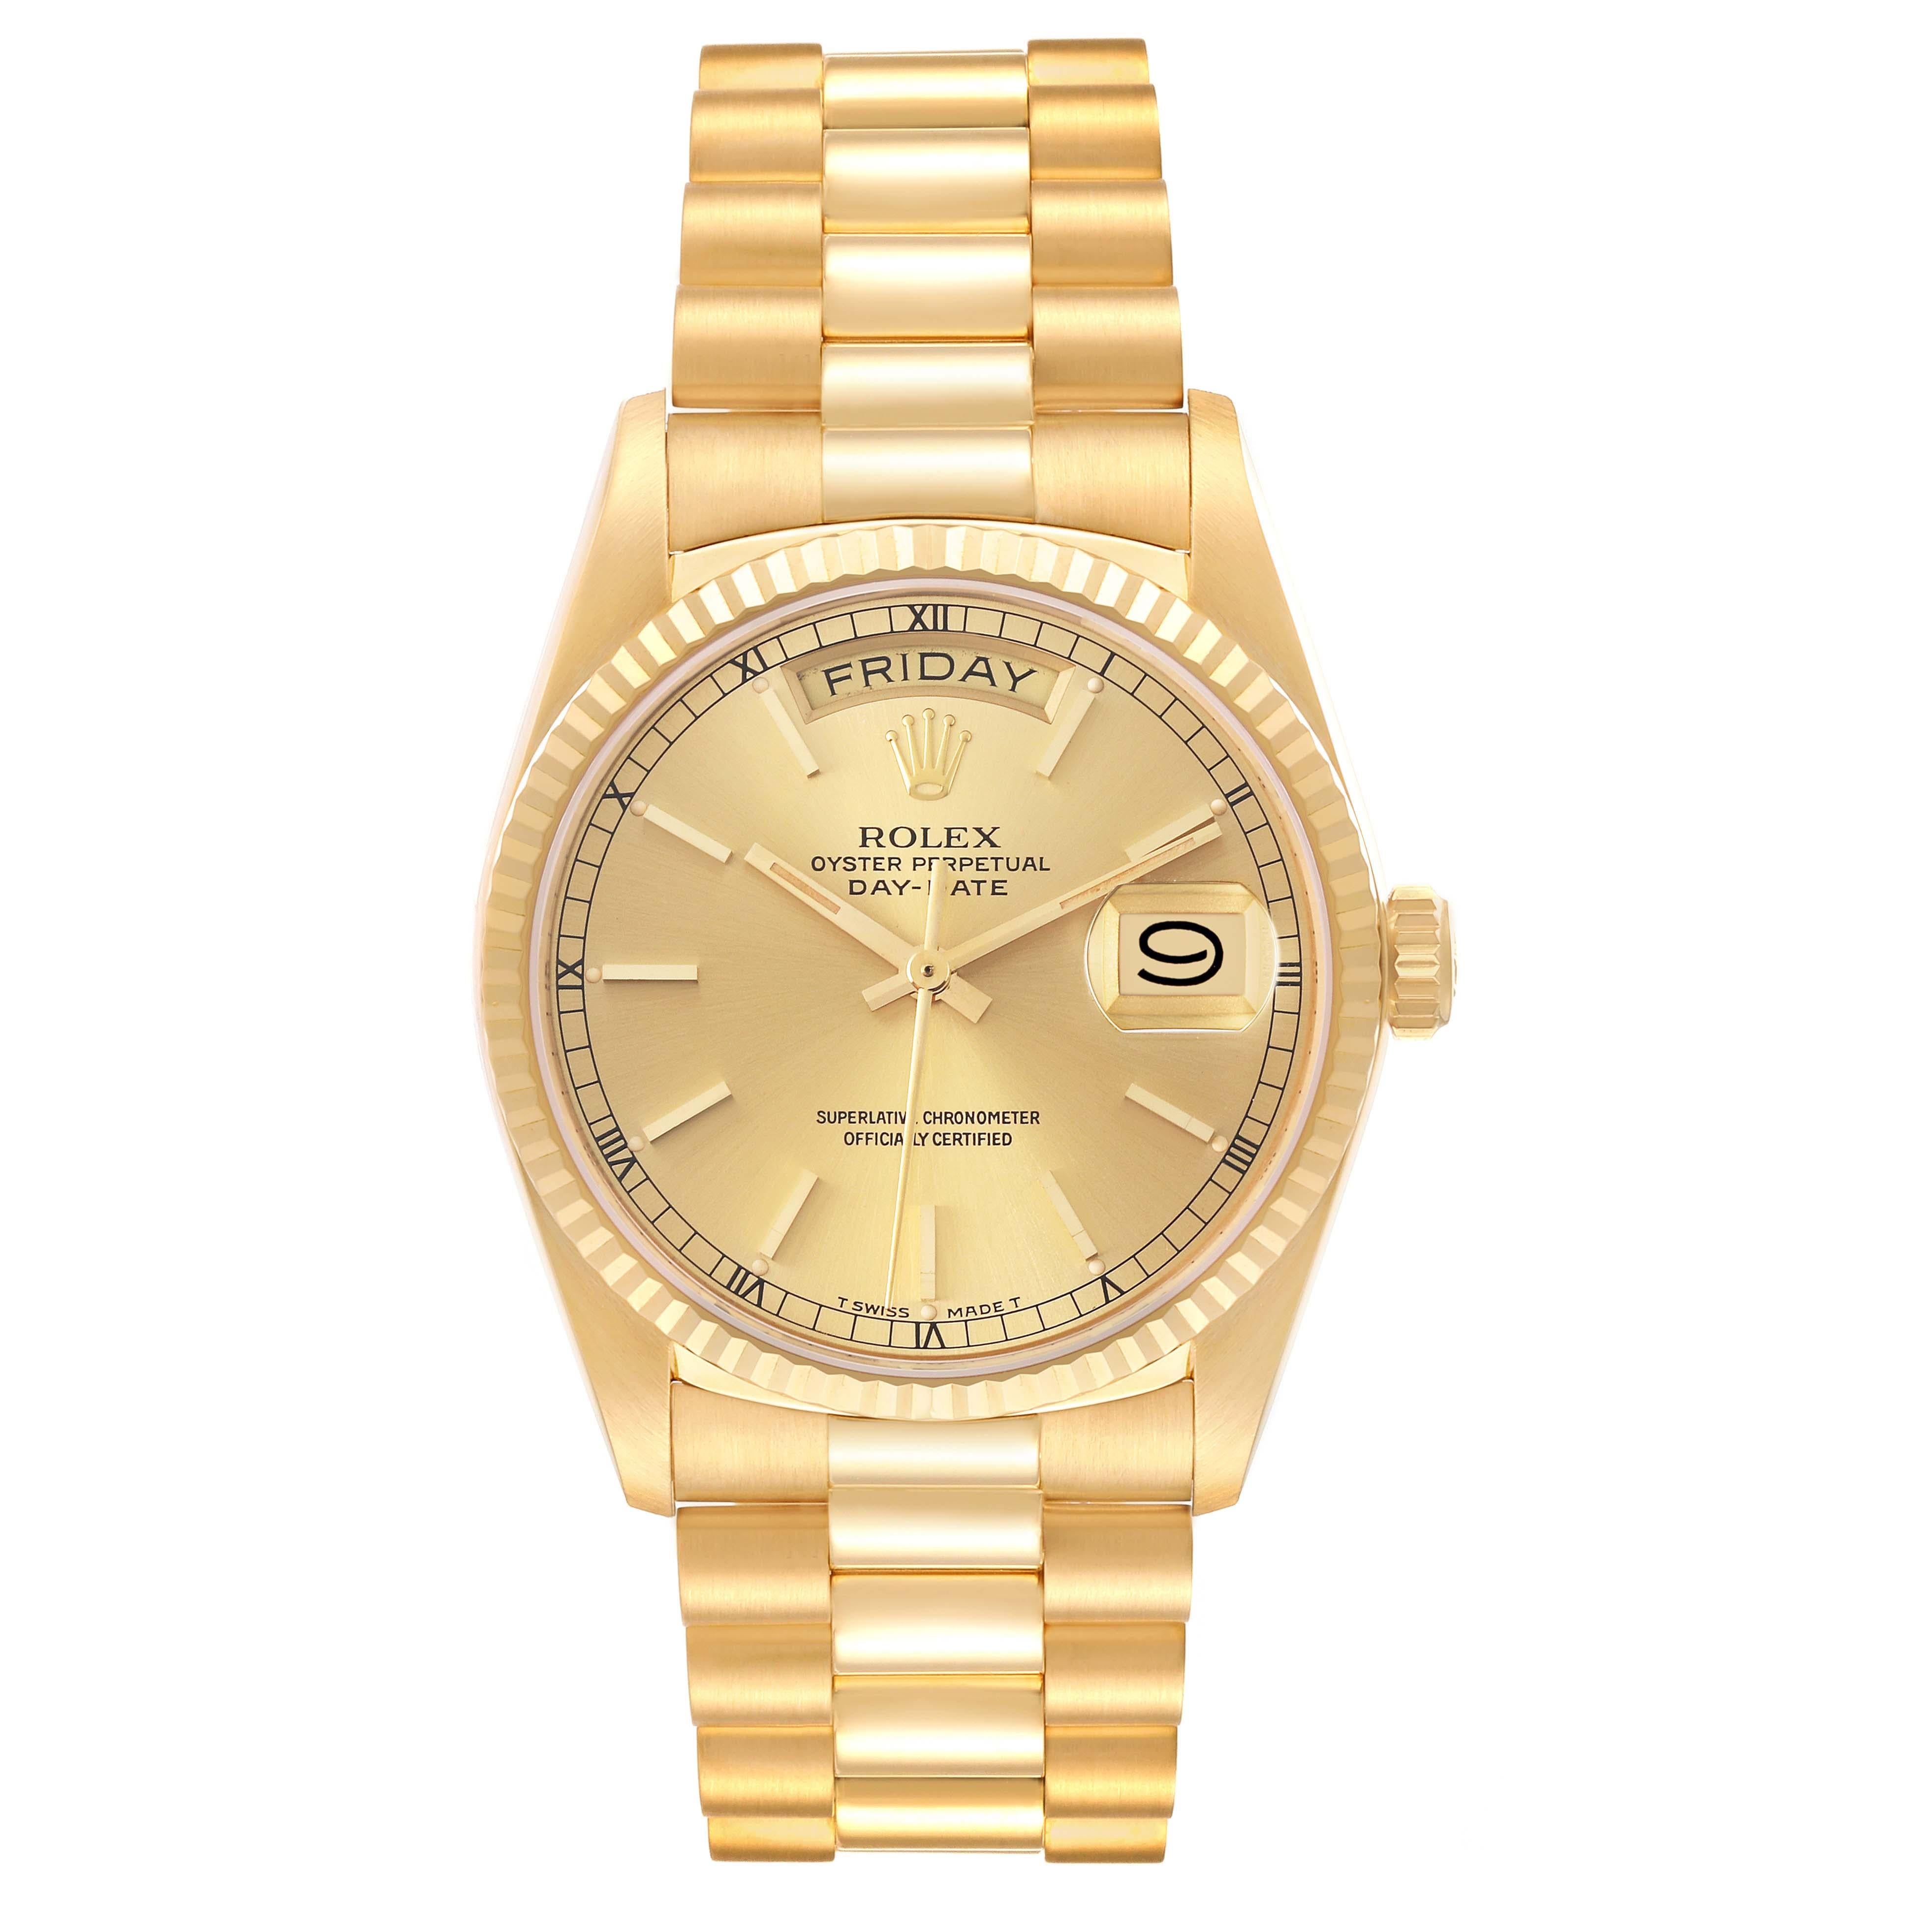 Rolex President Day-Date Yellow Gold Champagne Dial Mens Watch 18038. Officially certified chronometer self-winding movement. 18k yellow gold oyster case 36.0 mm in diameter.  Rolex logo on a crown. 18k yellow gold fluted bezel. Scratch resistant